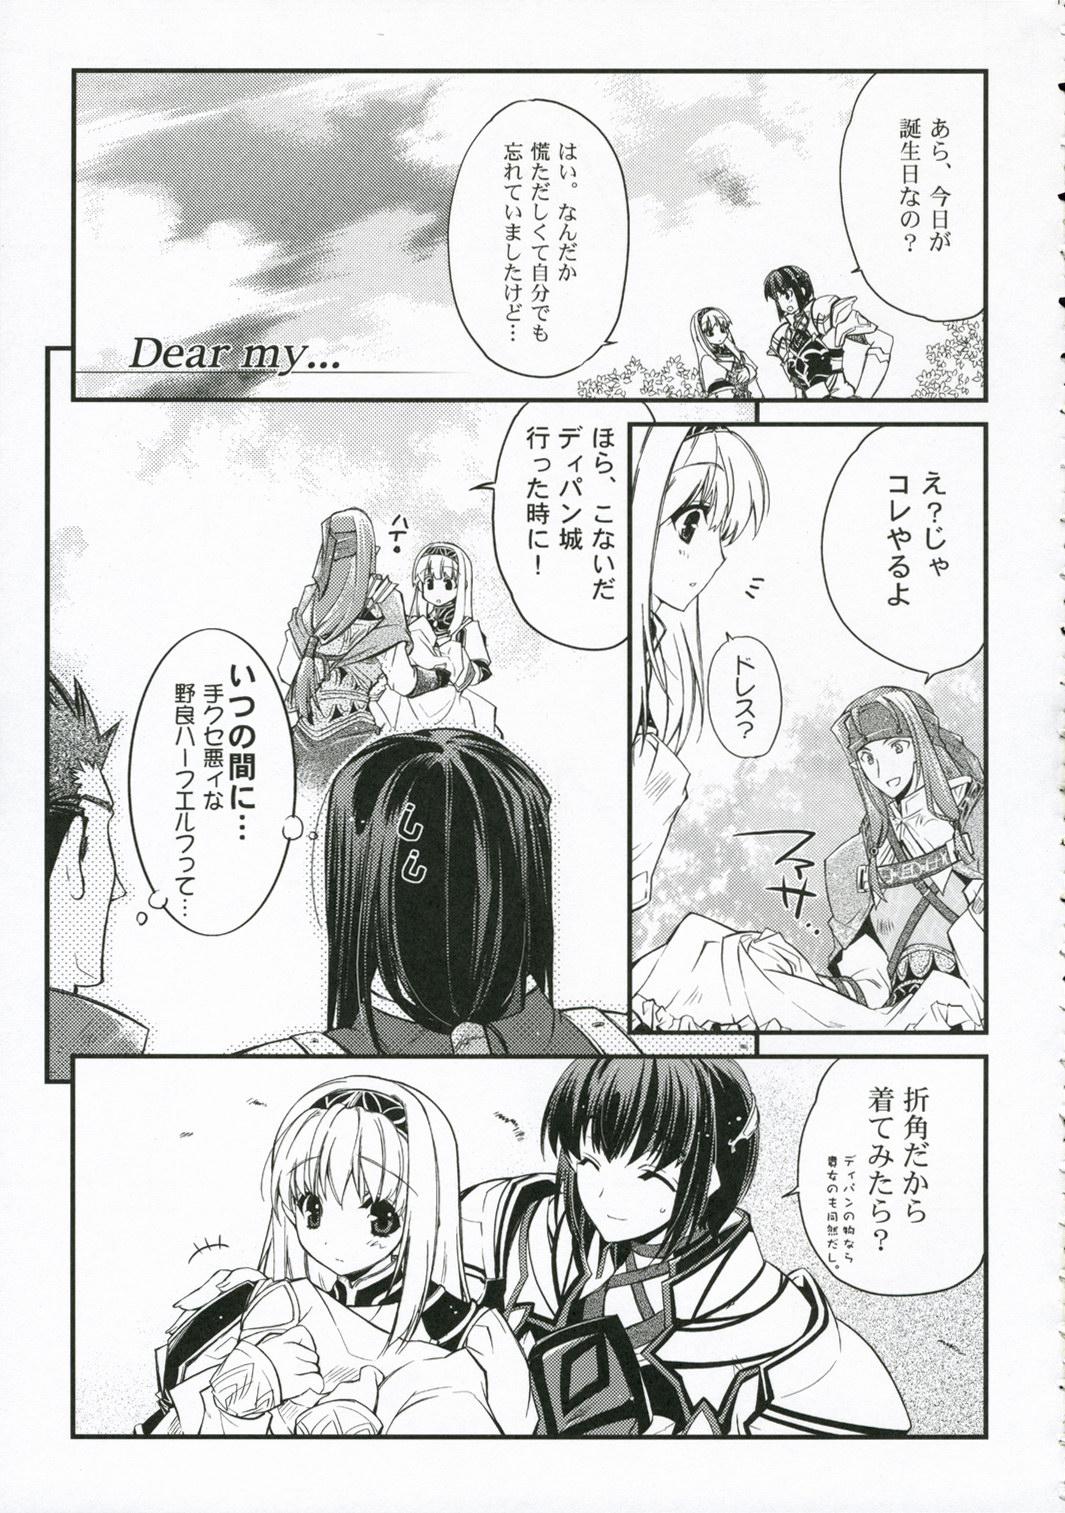 Soapy Glamorous Blue - Valkyrie profile Time - Page 11